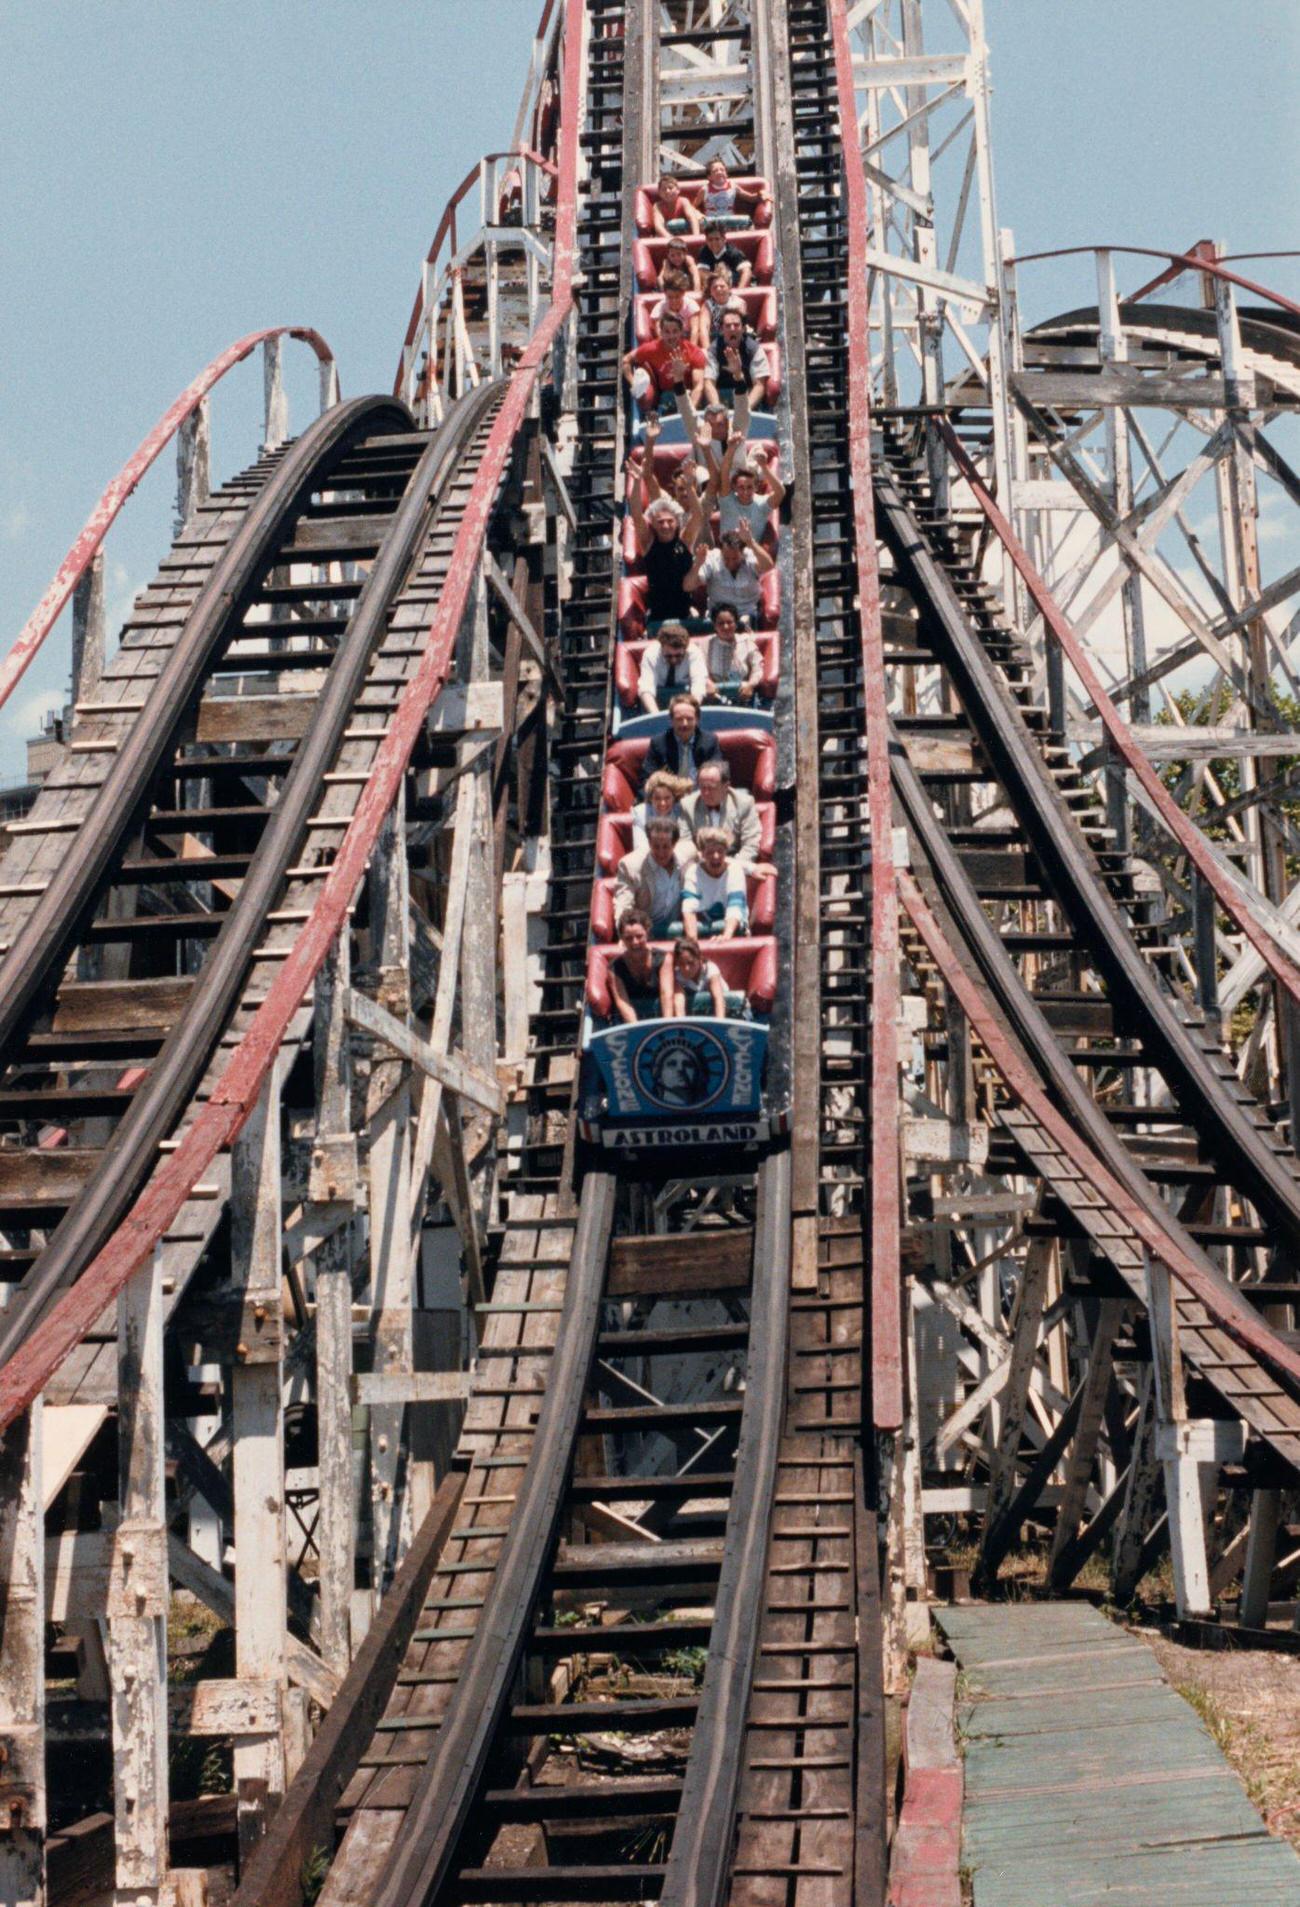 Cyclone Rollercoaster Reopens, Coney Island, 1986